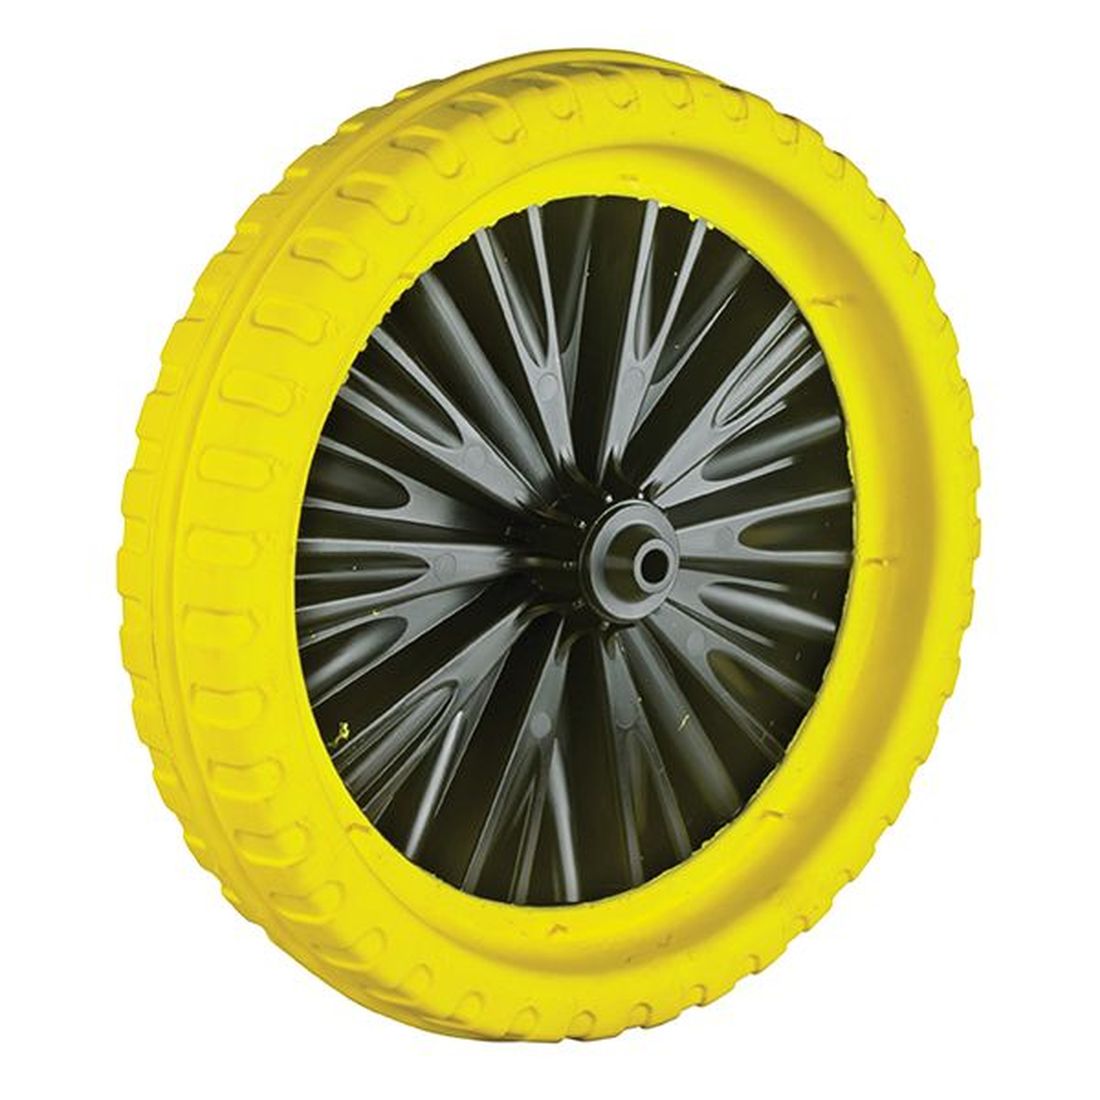 Walsall Titan Universal Puncture Proof Wheel                                            